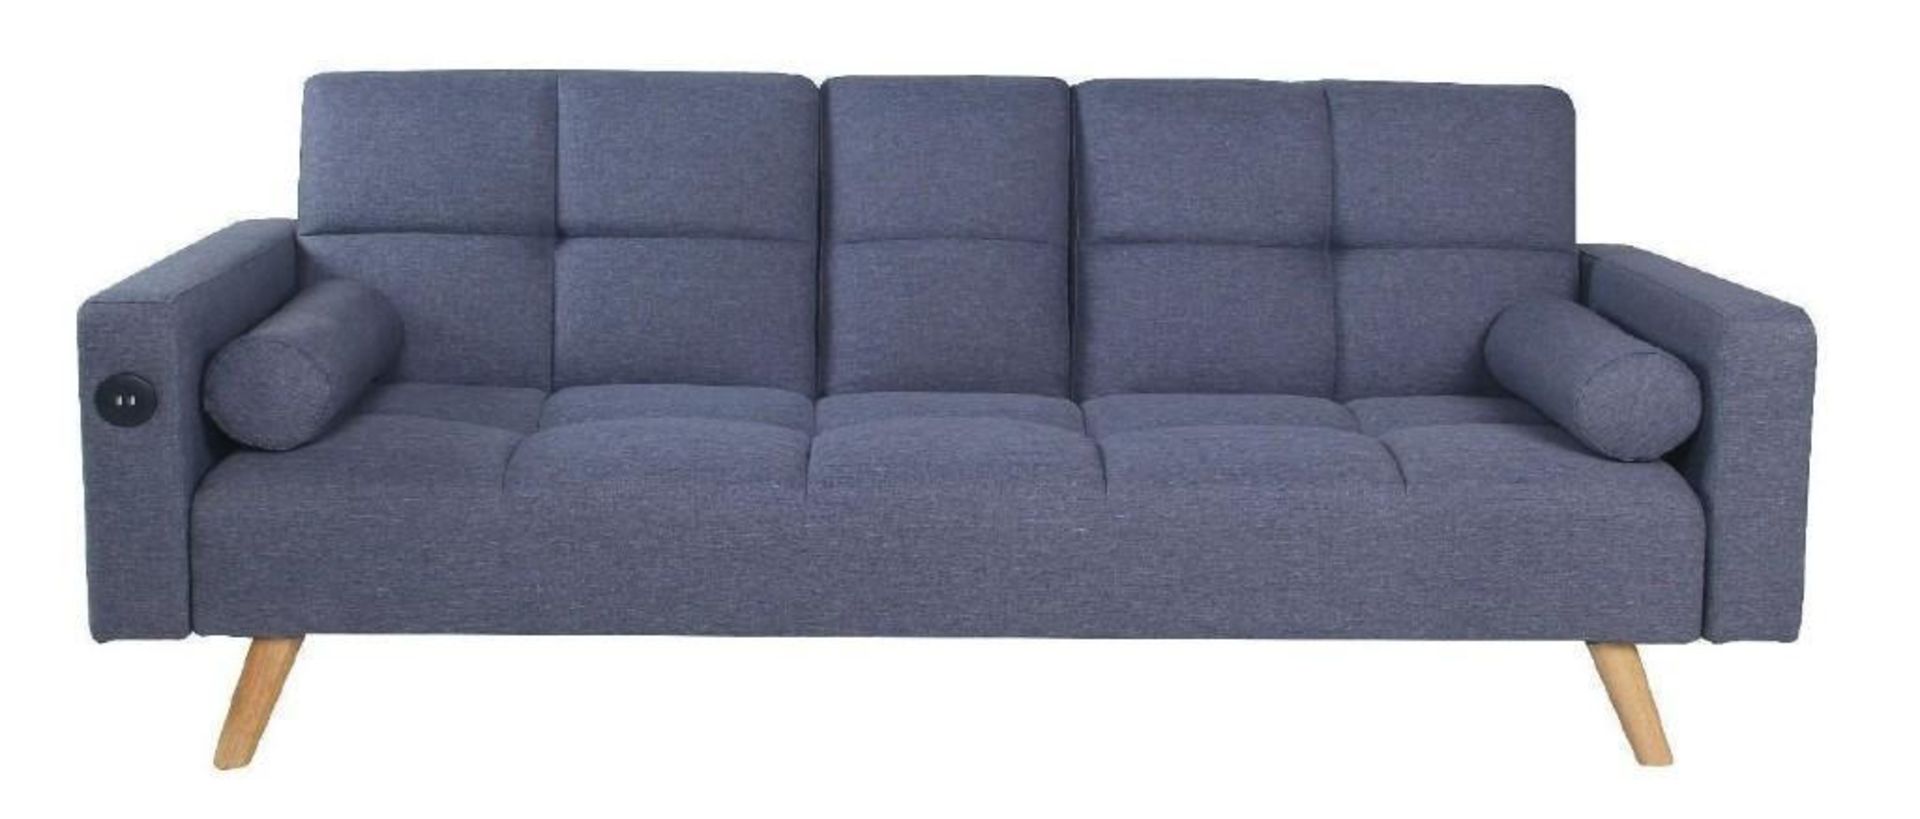 *BRAND NEW* Heavy Duty Clic Clac sofa bed with 2 bolsters, dual usb & charger socket. - Image 4 of 11